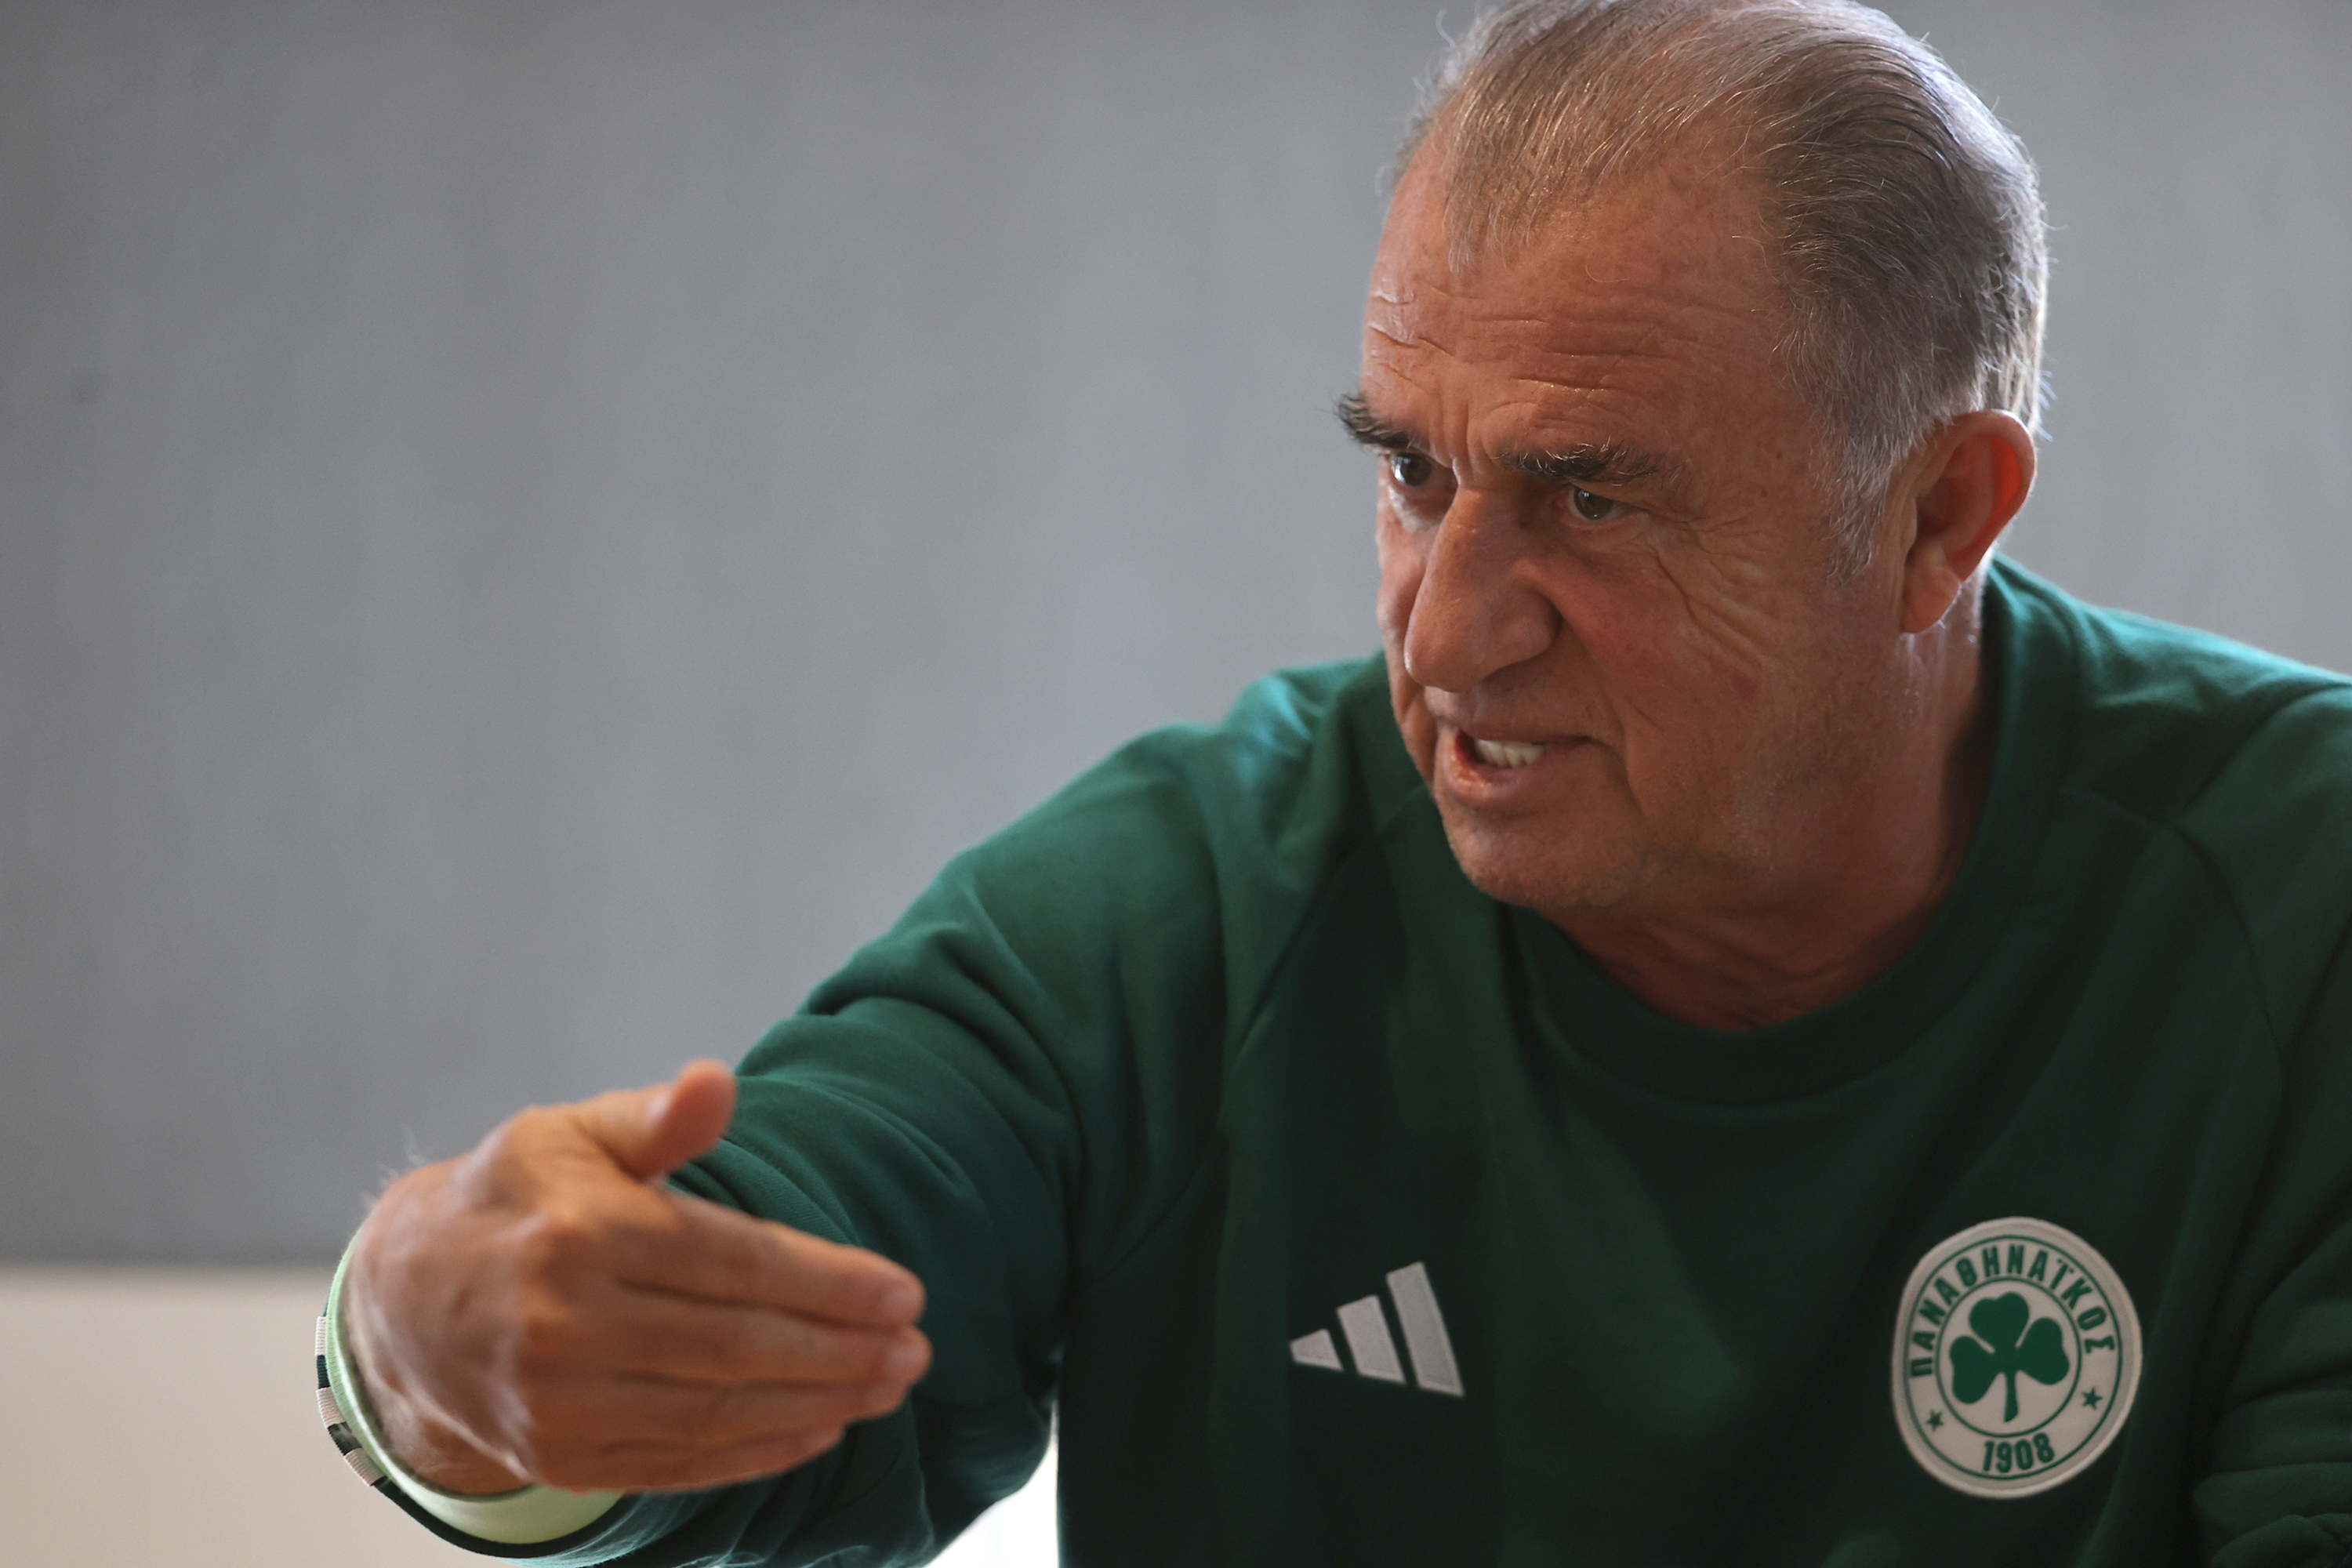 aa-20240411-34246532-34246531-head-coach-of-panathinaikos-fatih-terim-meets-with-journalists-in-athens.jpg